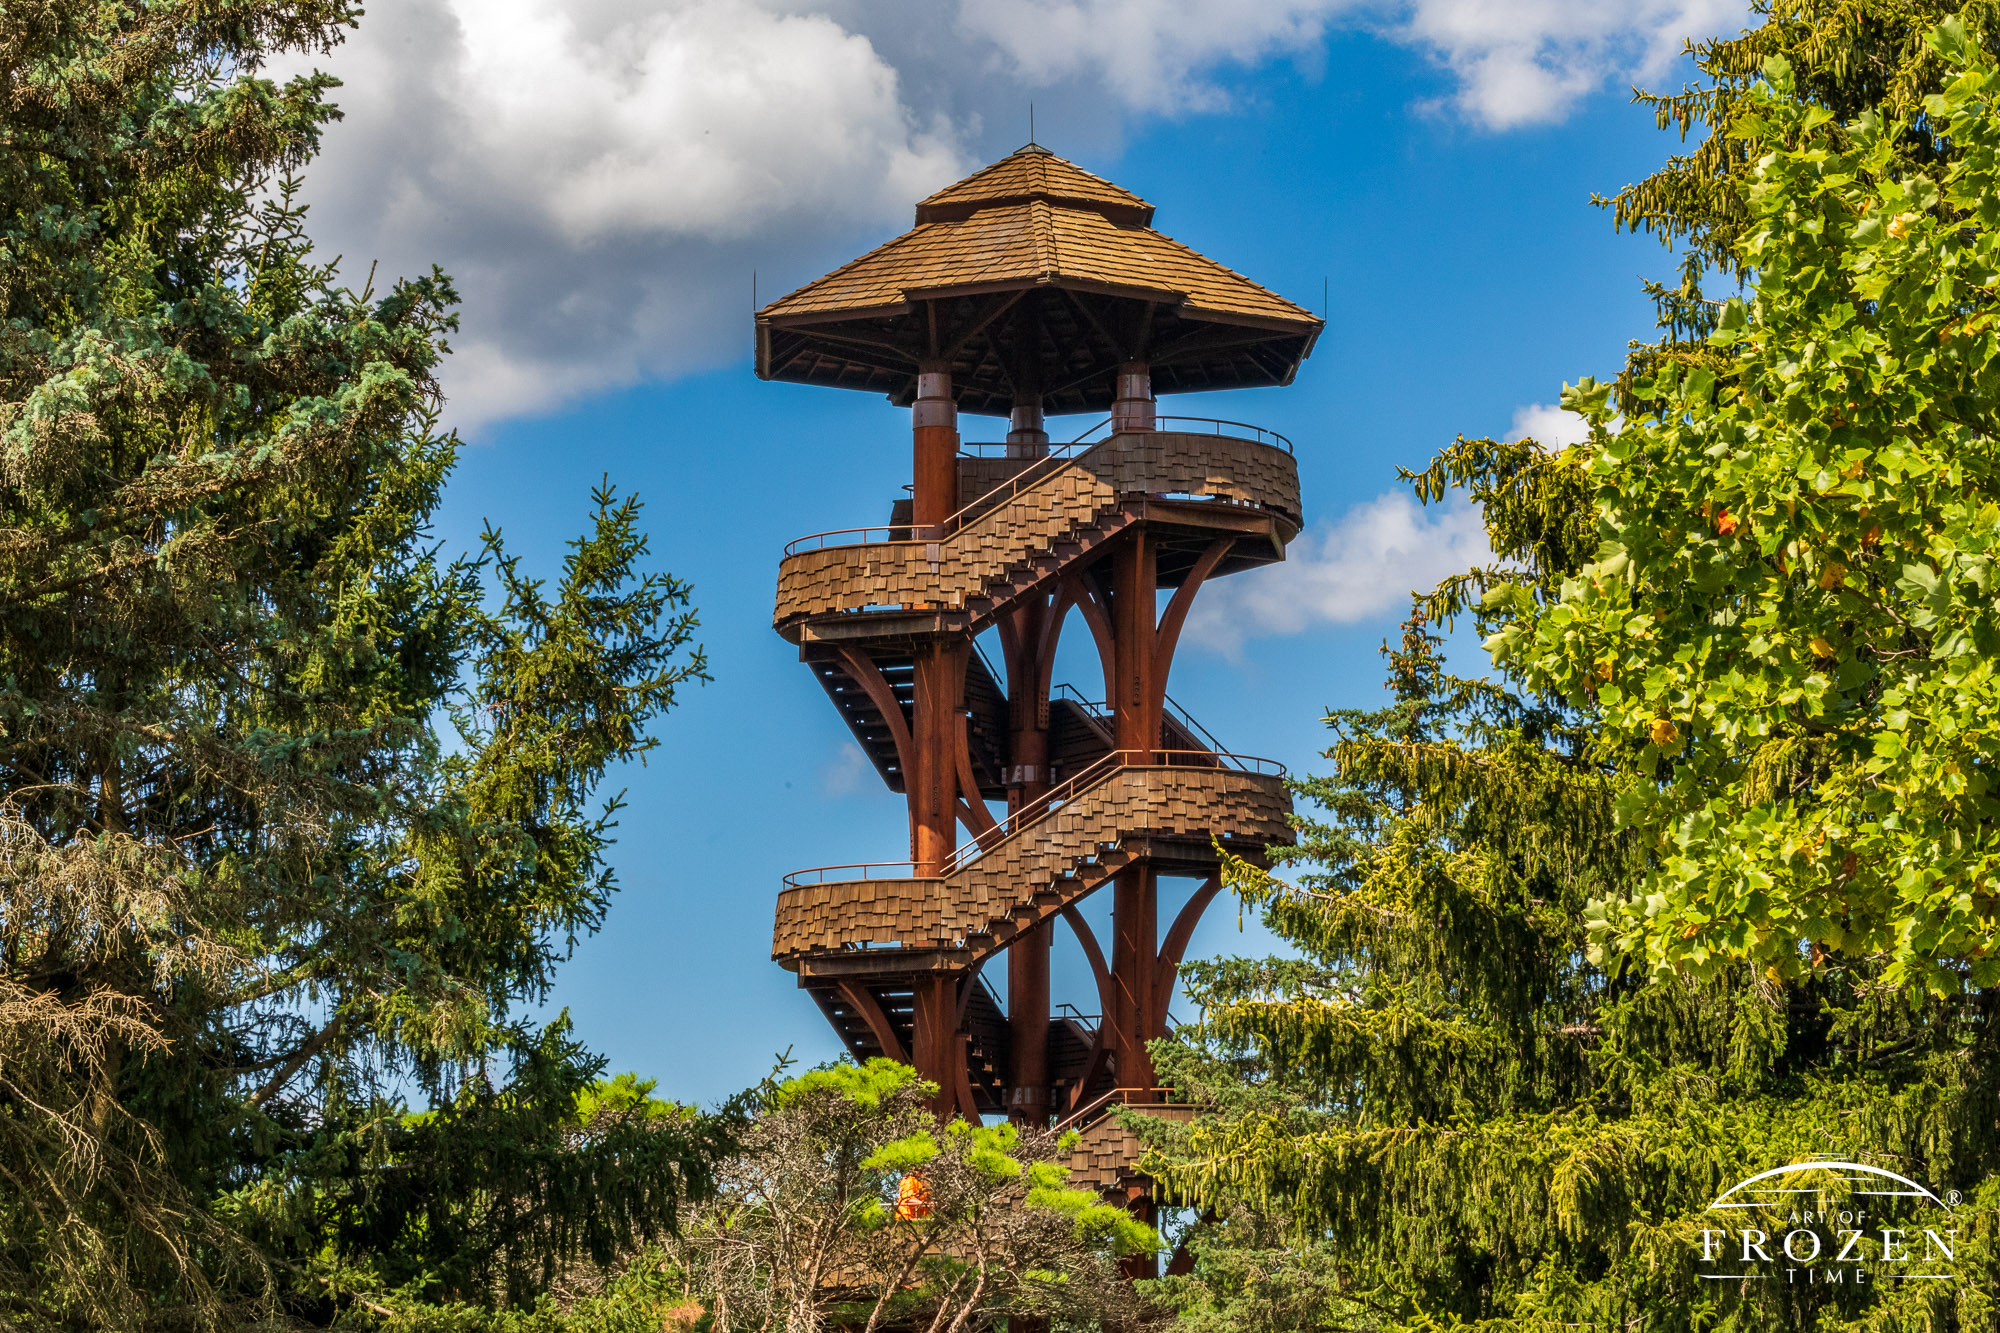 A compositionally framed image of the Cox Arboretum MetroPark Tree Tower as it stands among the surrounding pine trees.